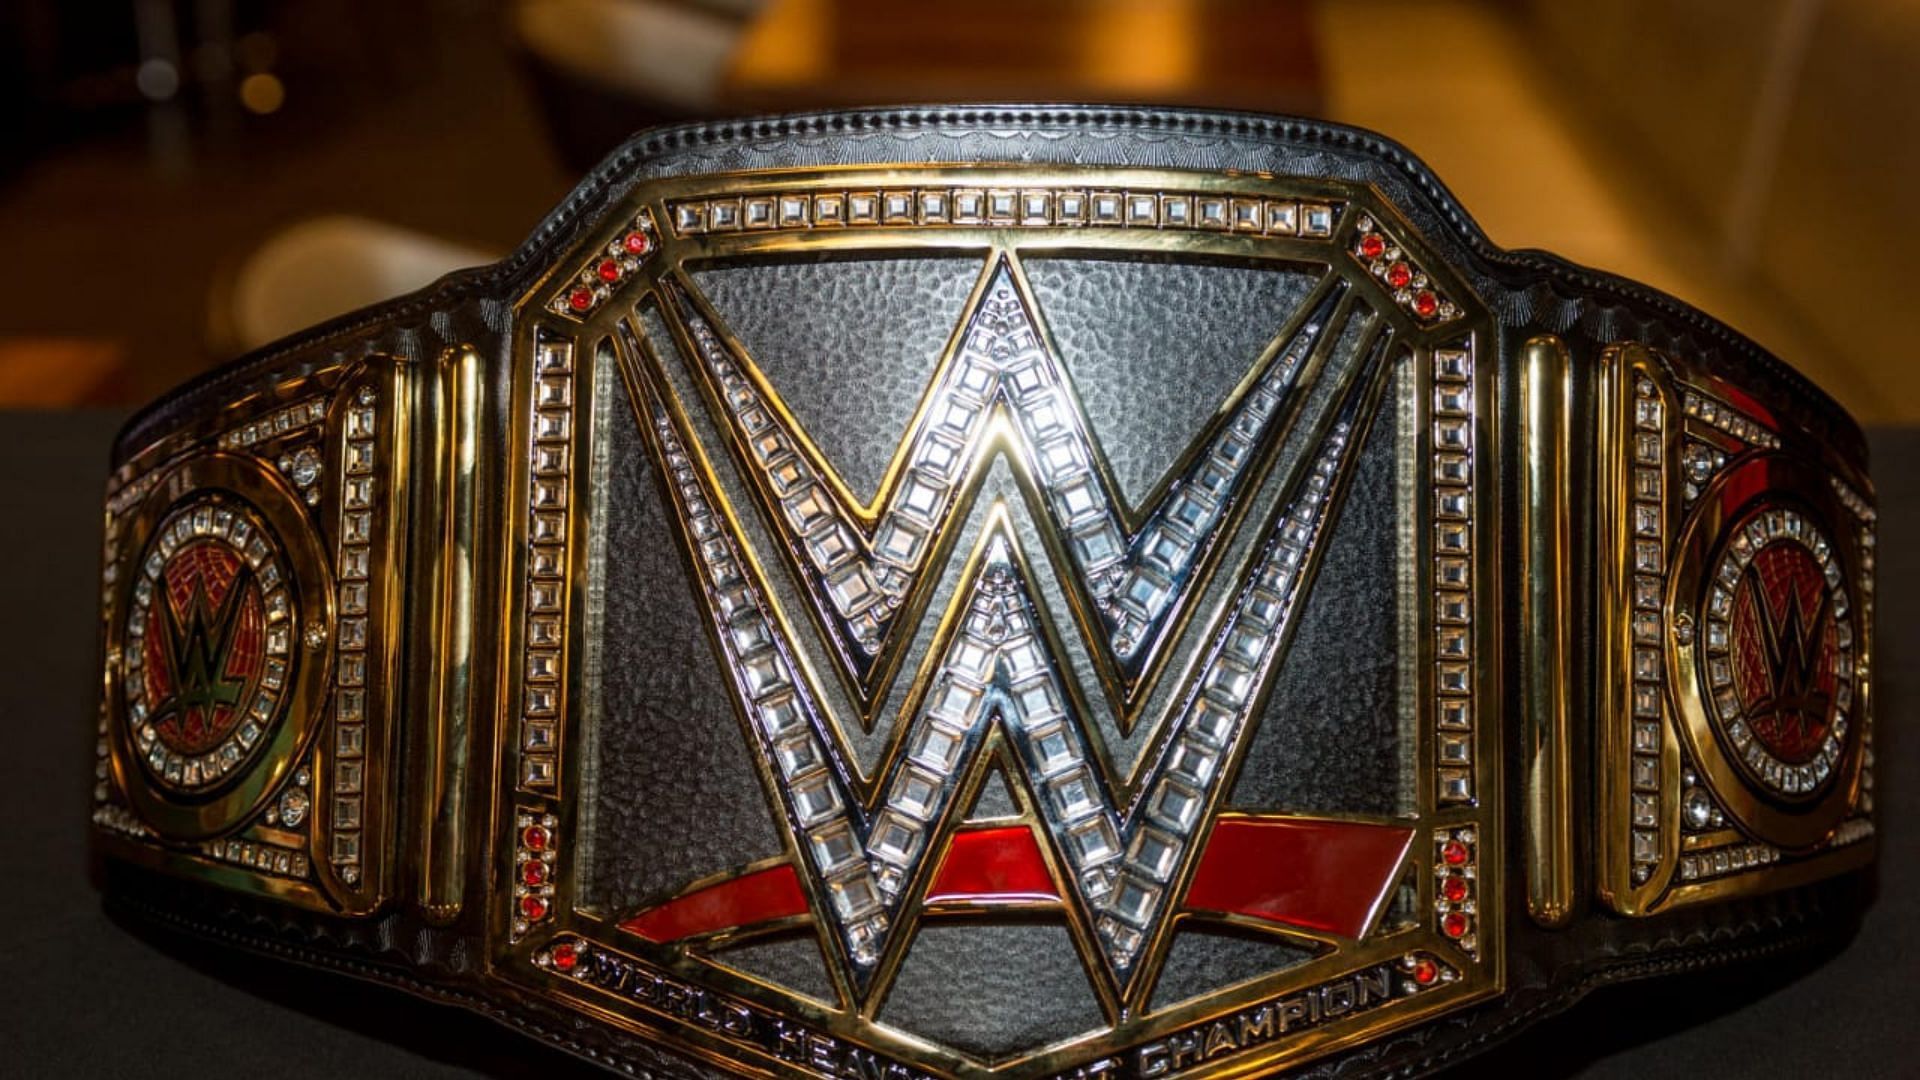 WWE Championship is one of the top prizes of the promotion